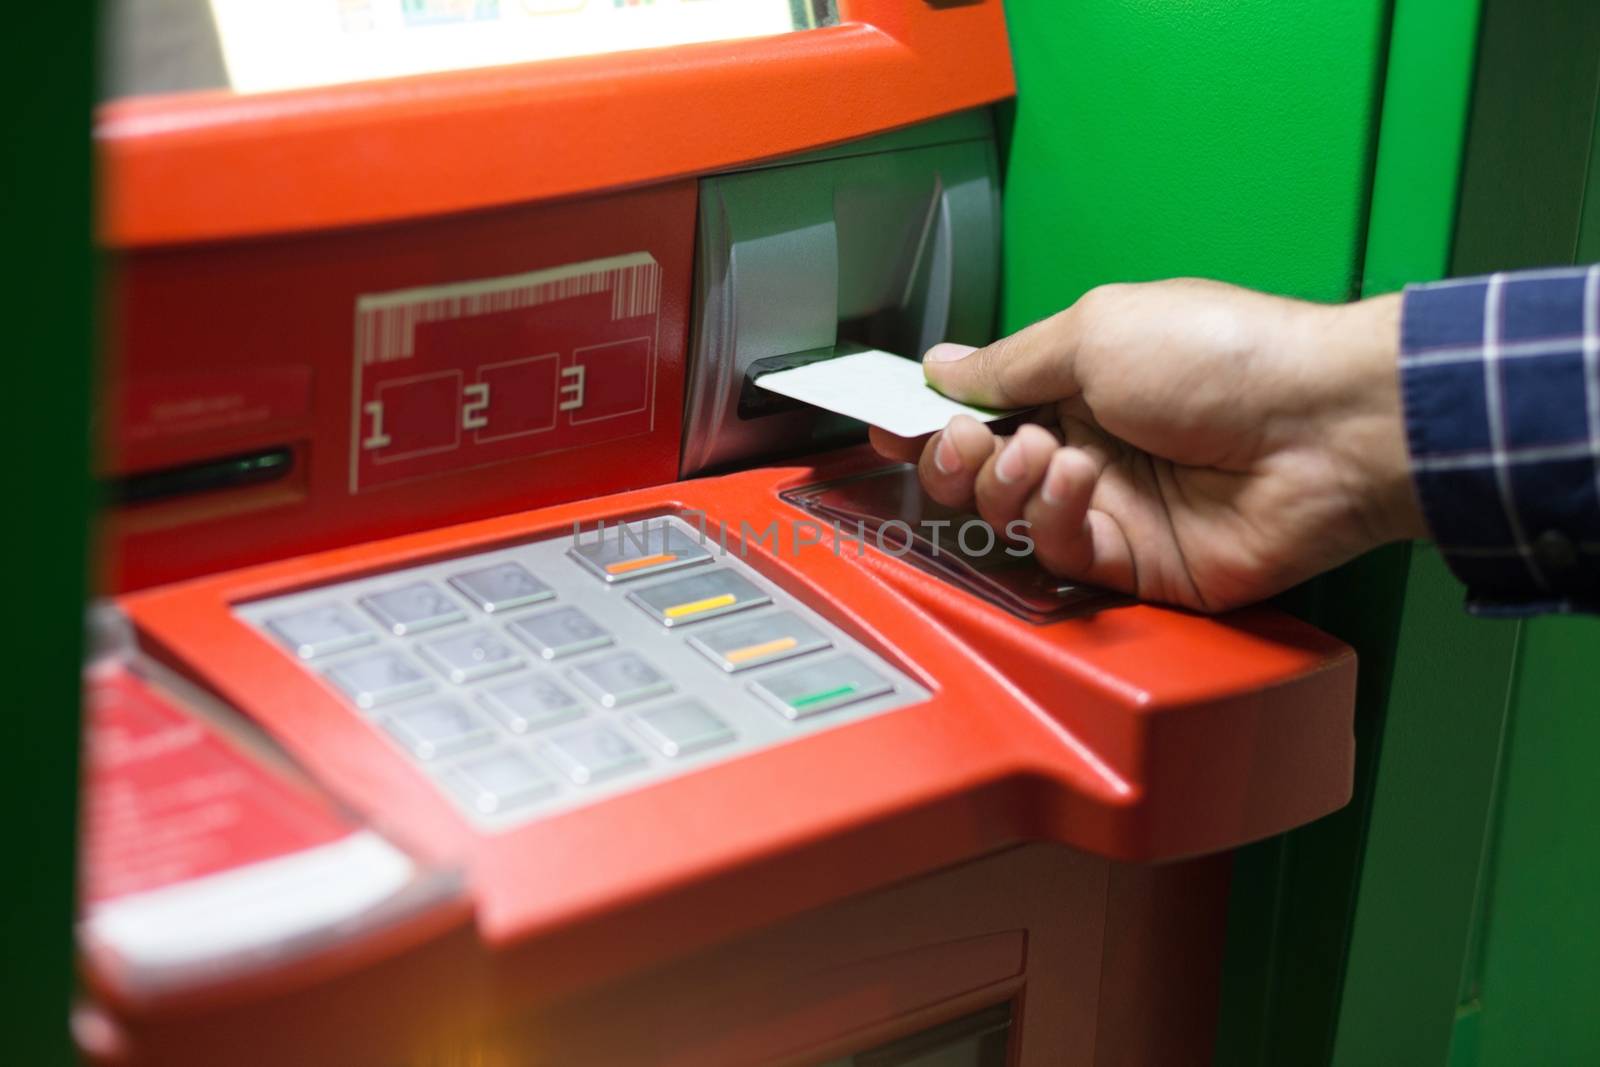 Hand inserting ATM card into bank machine to withdraw money by boytaro1428@gmail.com